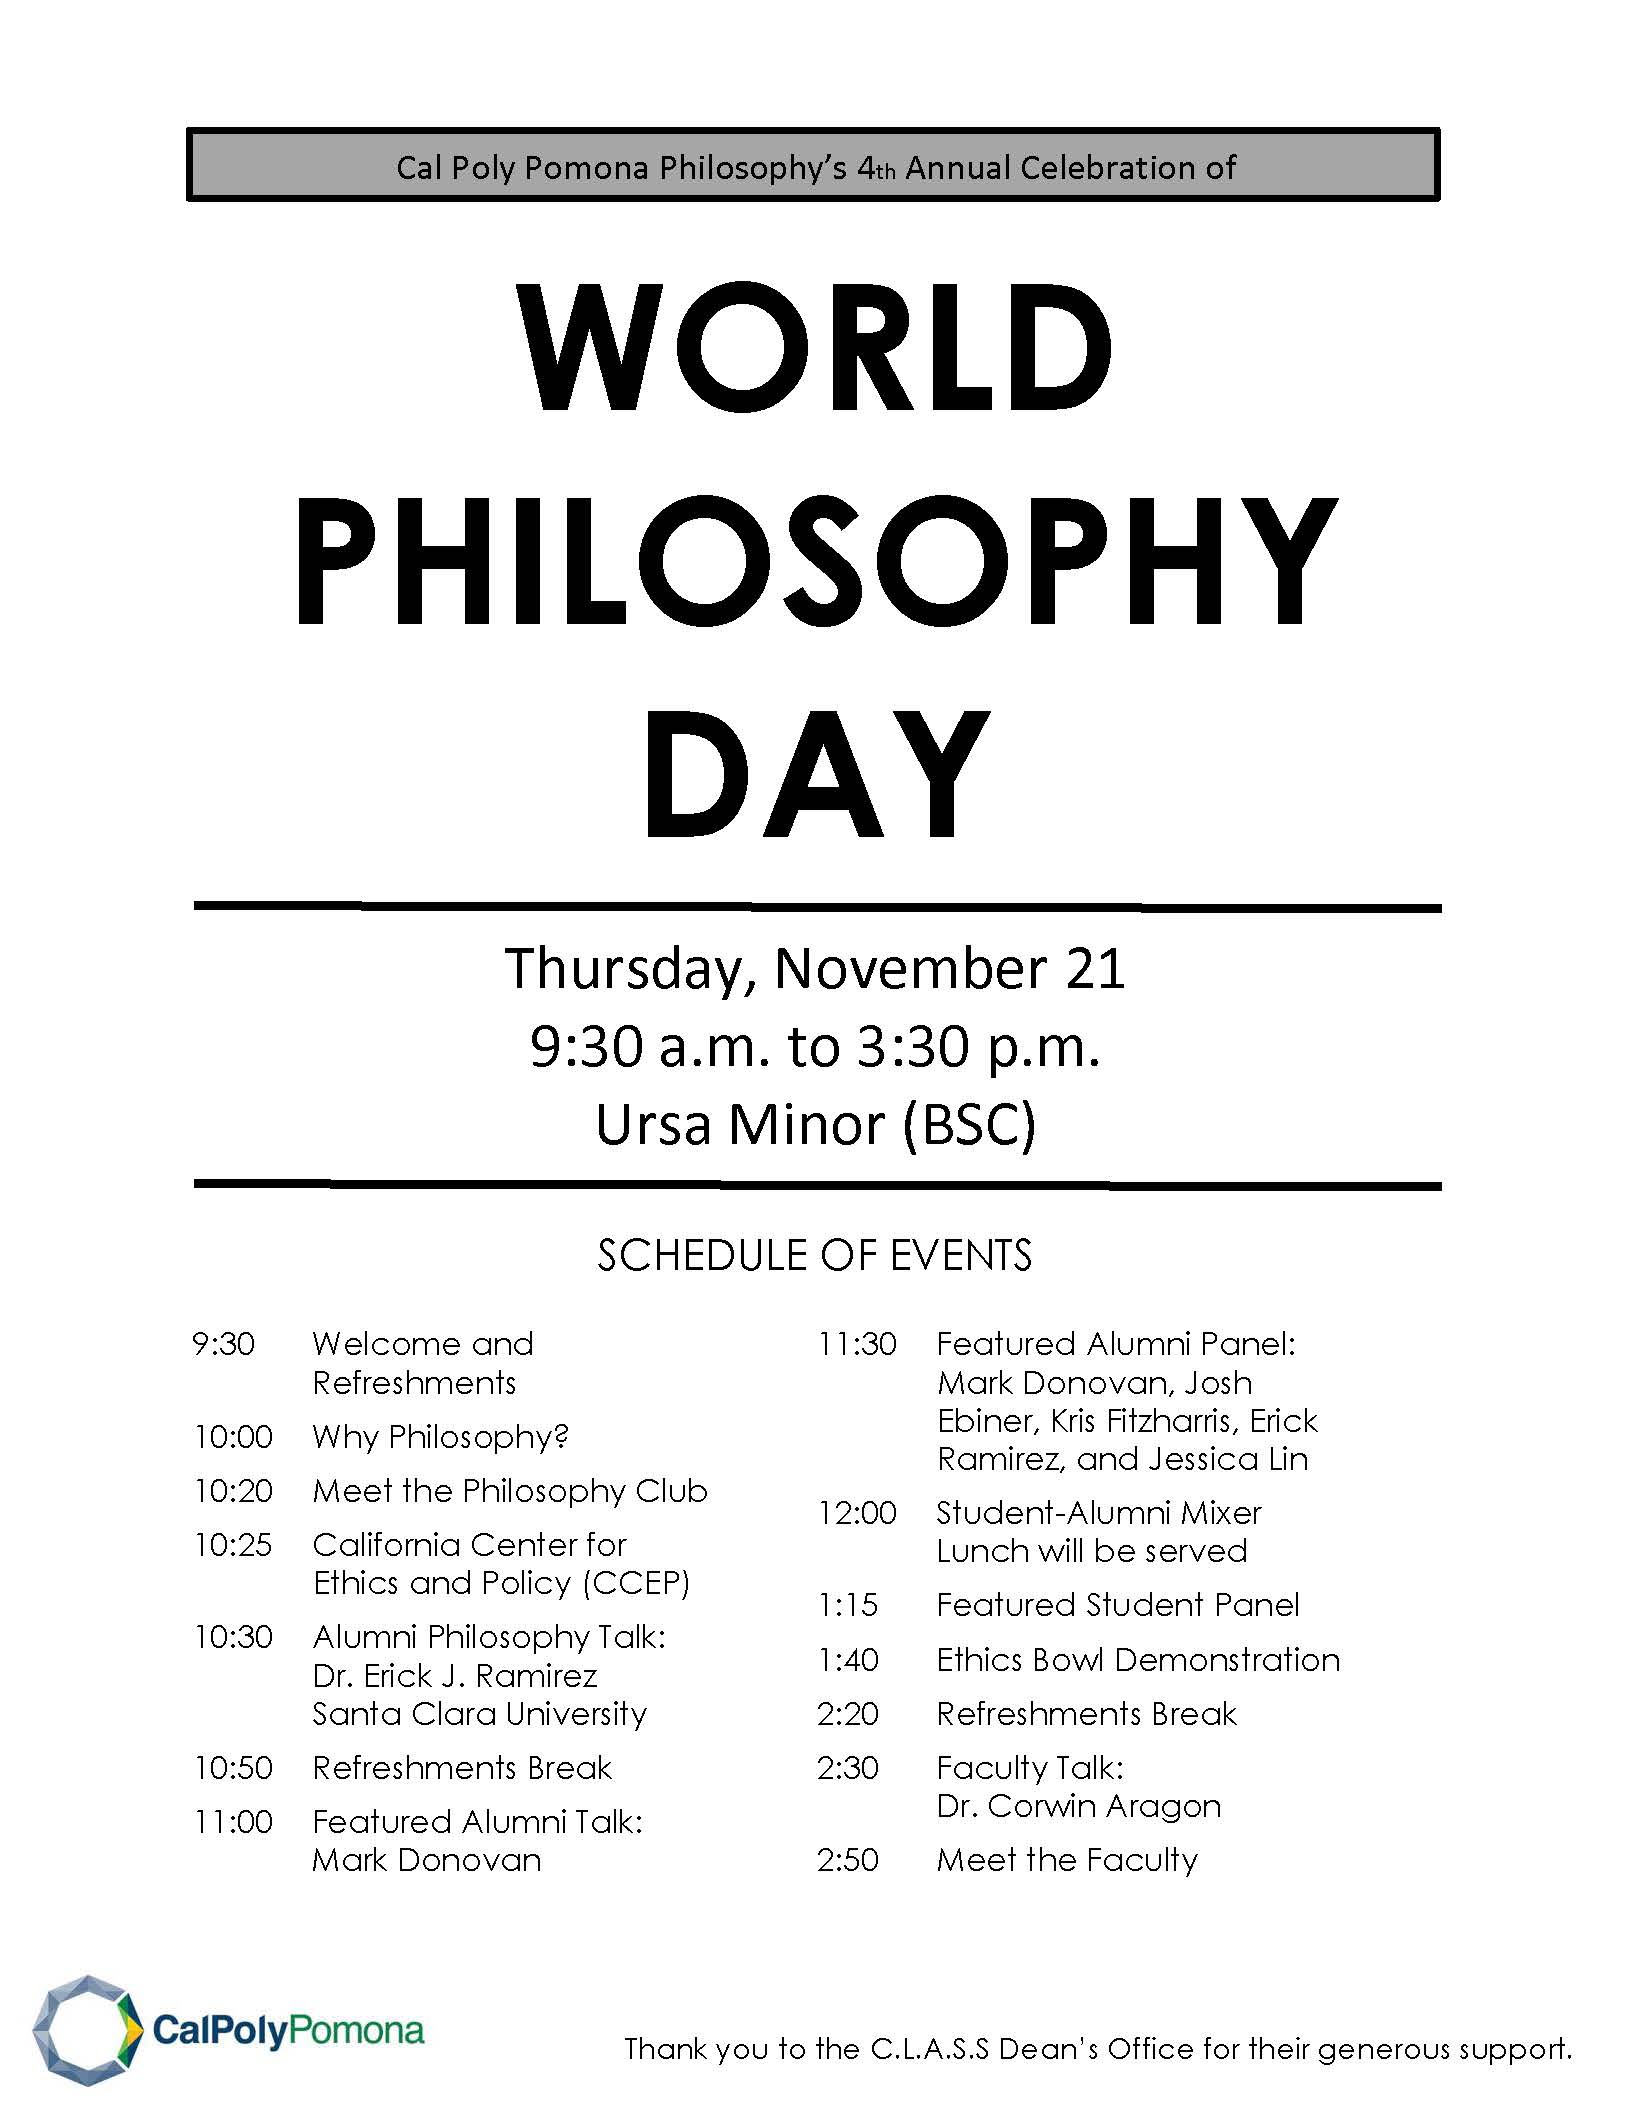 Schedule for World Philosophy Day 2019